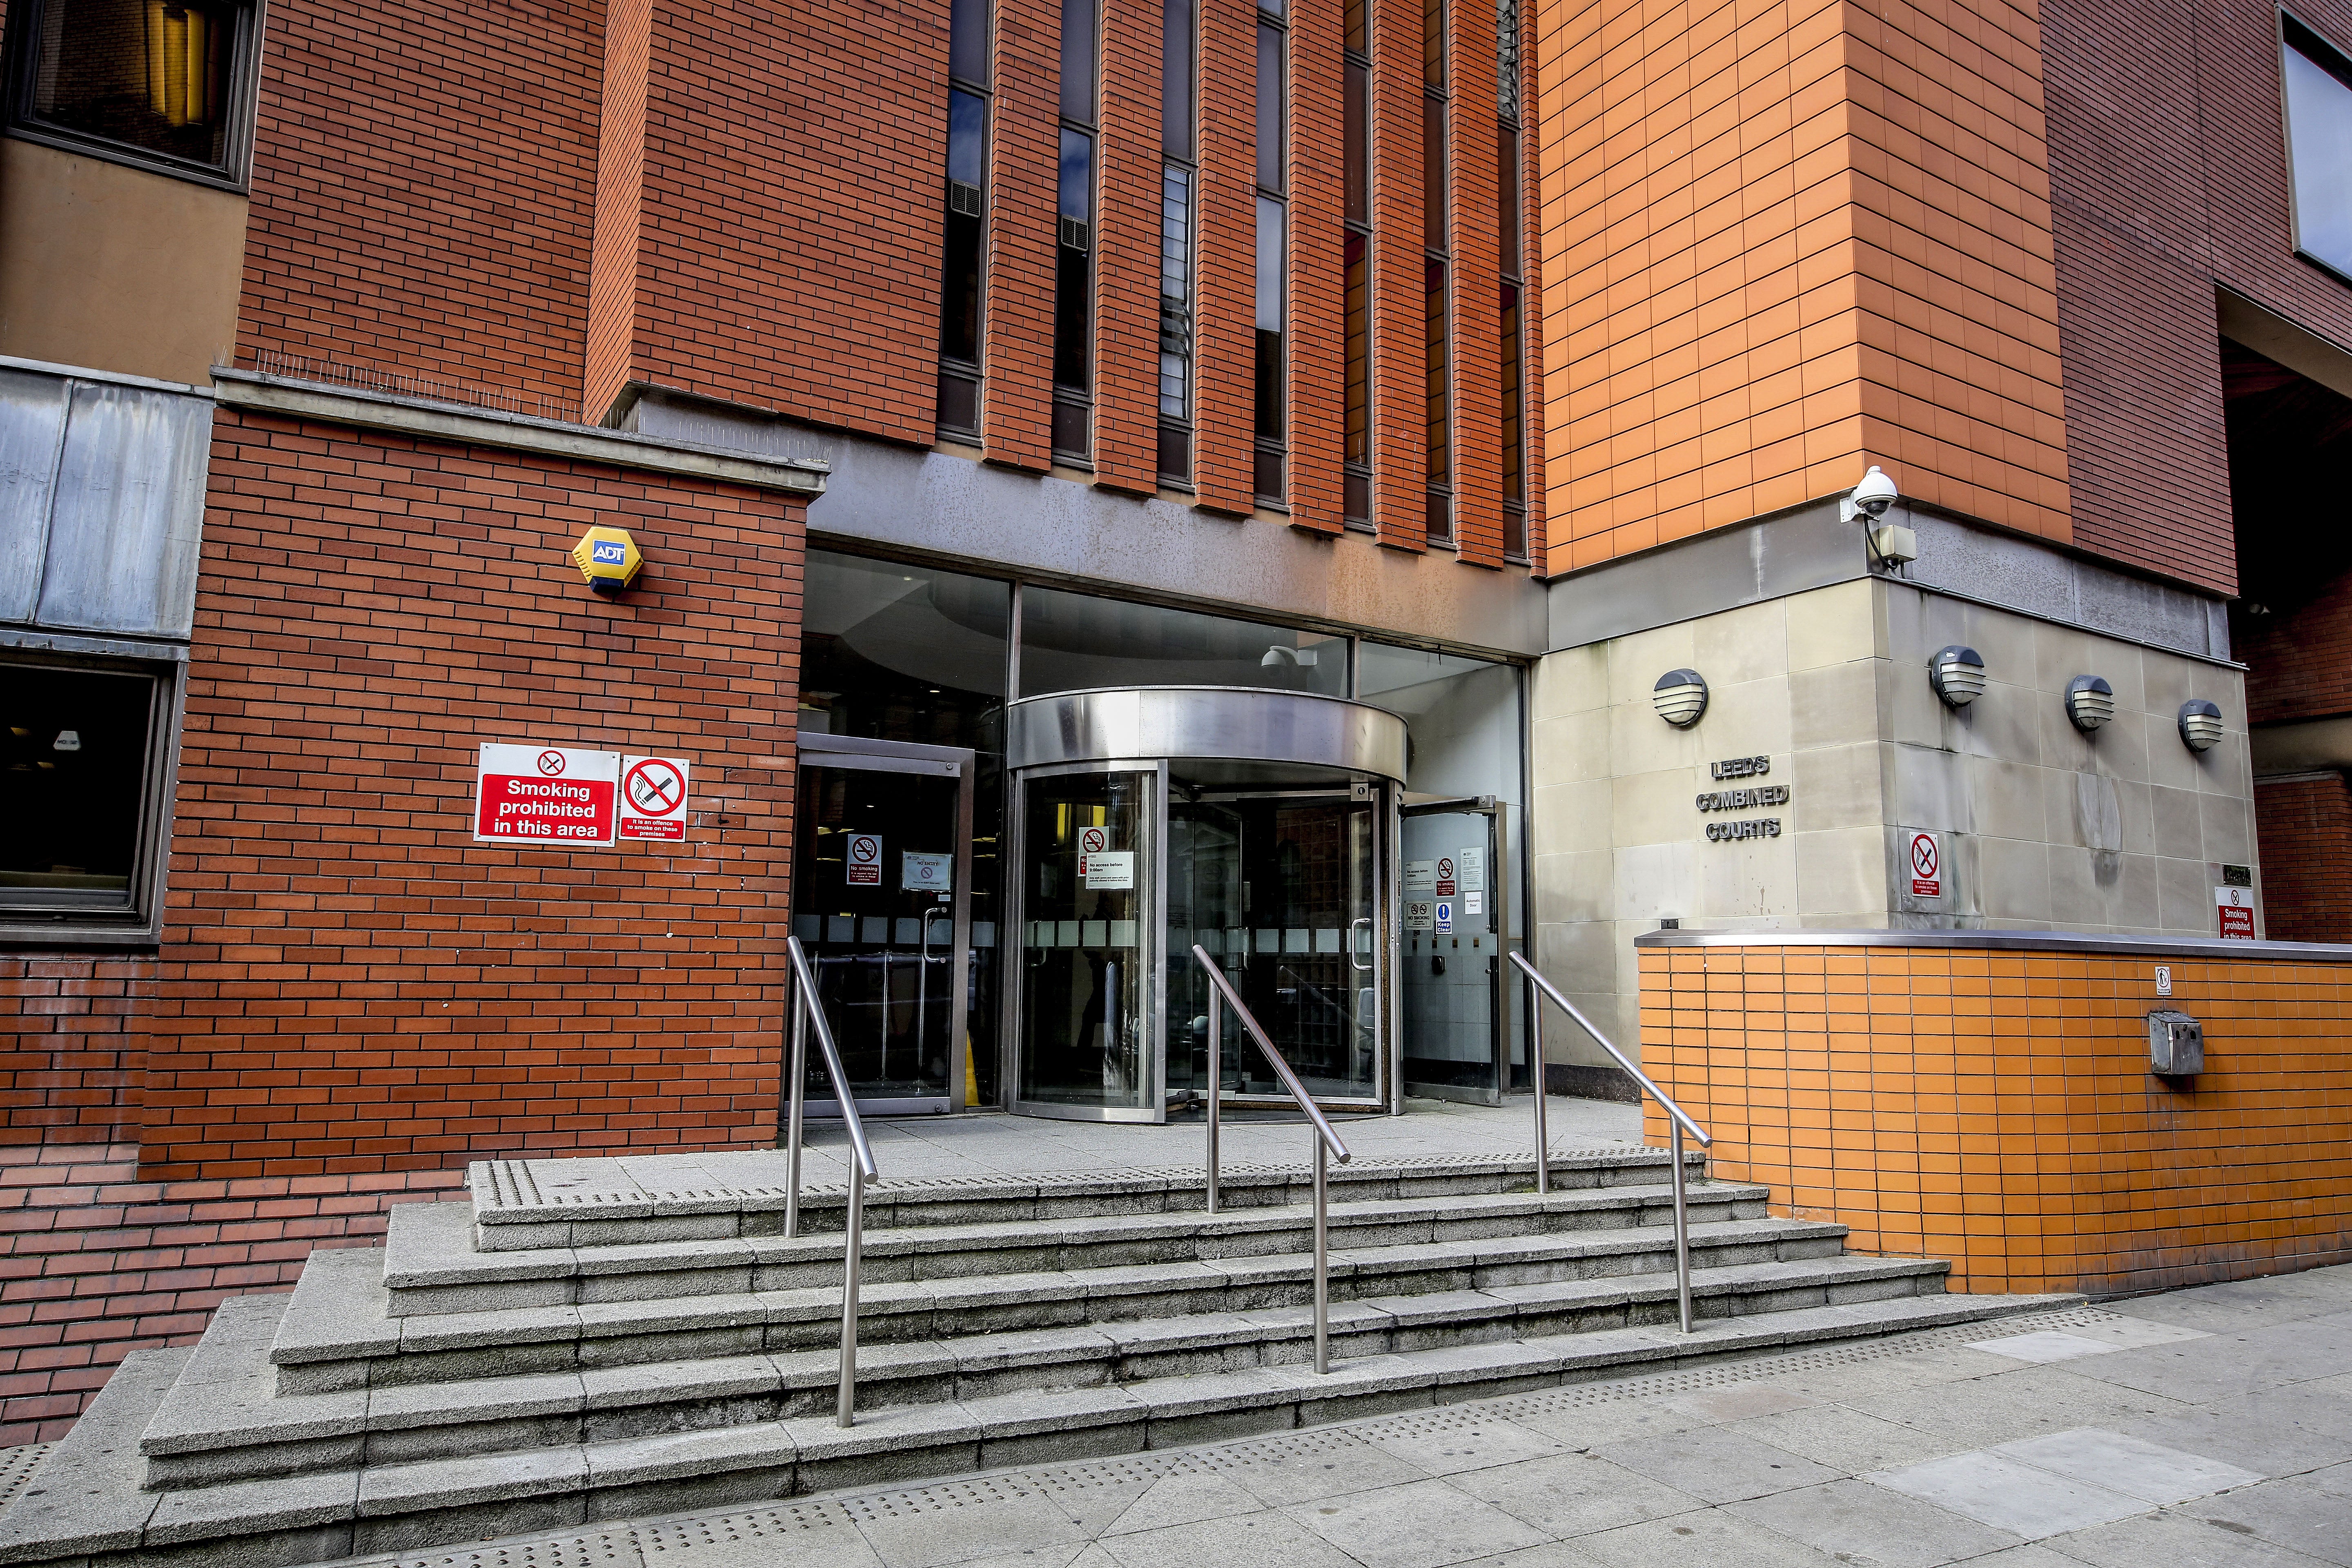 David McConnell had his conviction overturned at Leeds Crown Court